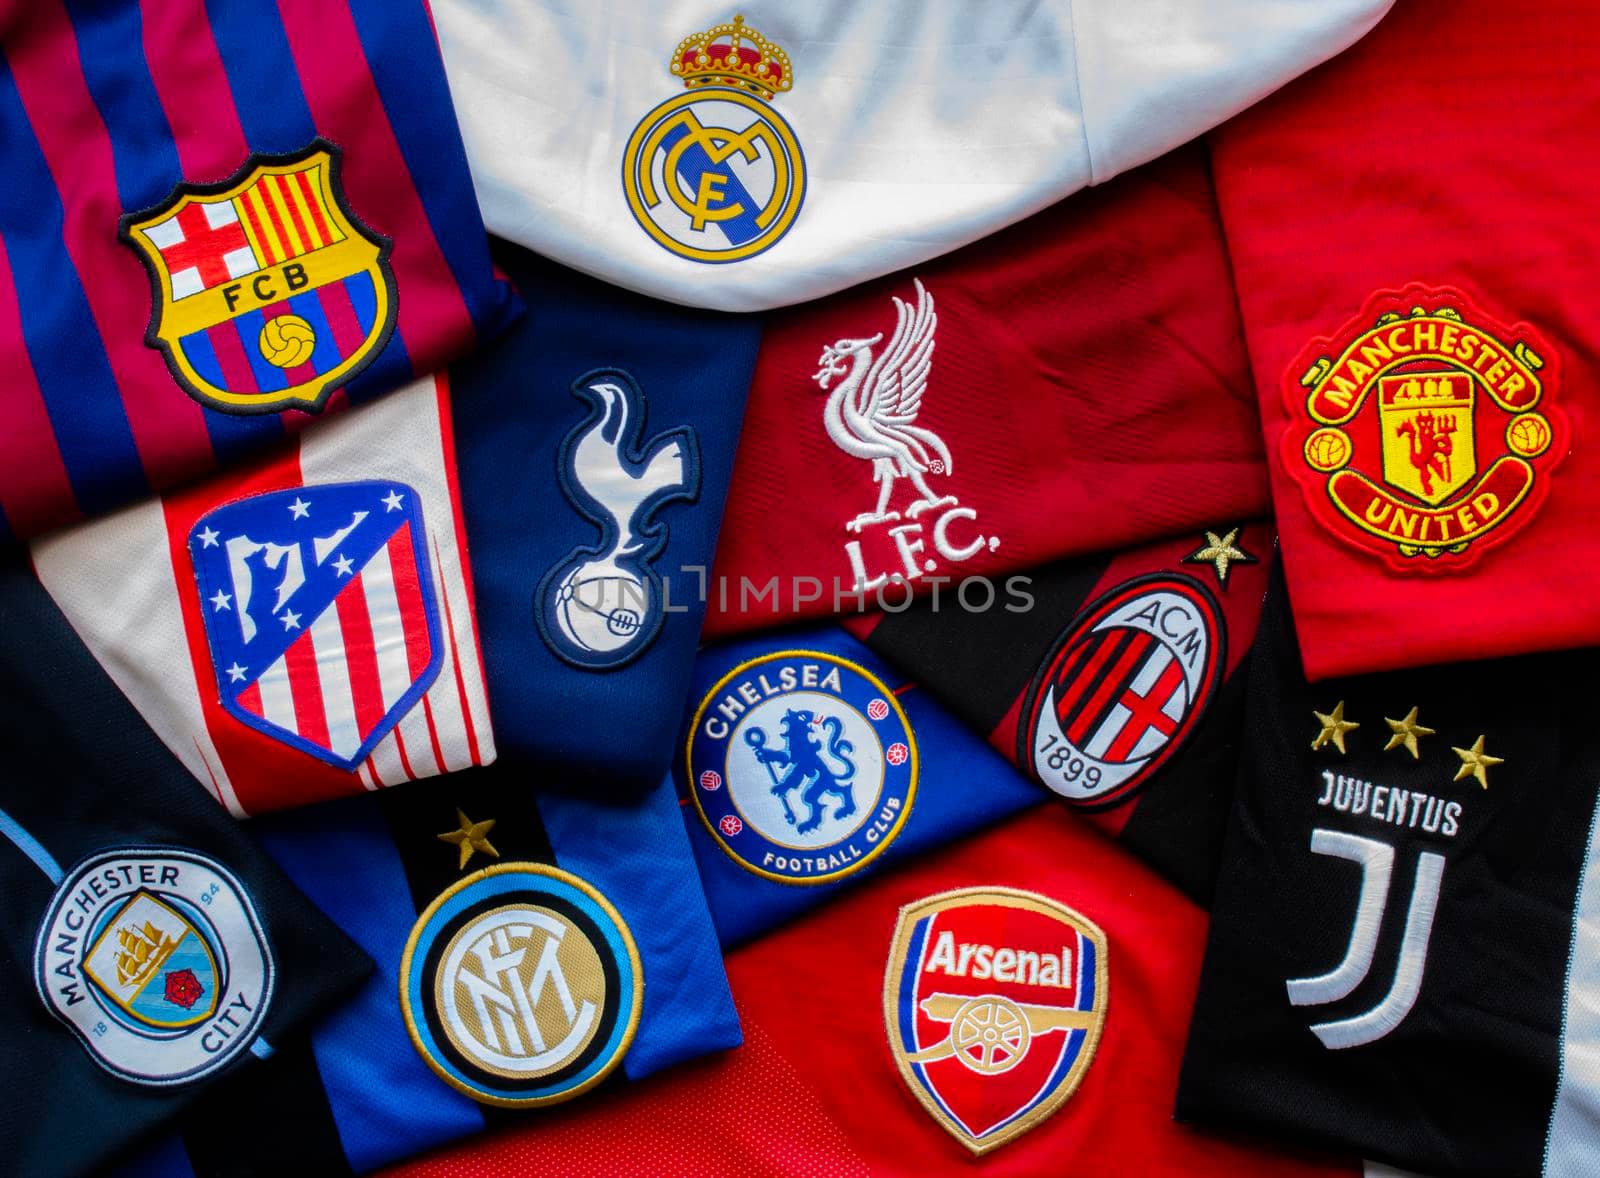 Barcelona, Catalonia, Spain. April 19, 2021. Horizontal view of The Super League or European Super League teams jerseys. annual club football competition to be contested by an exclusive group of top European football clubs. by oasisamuel